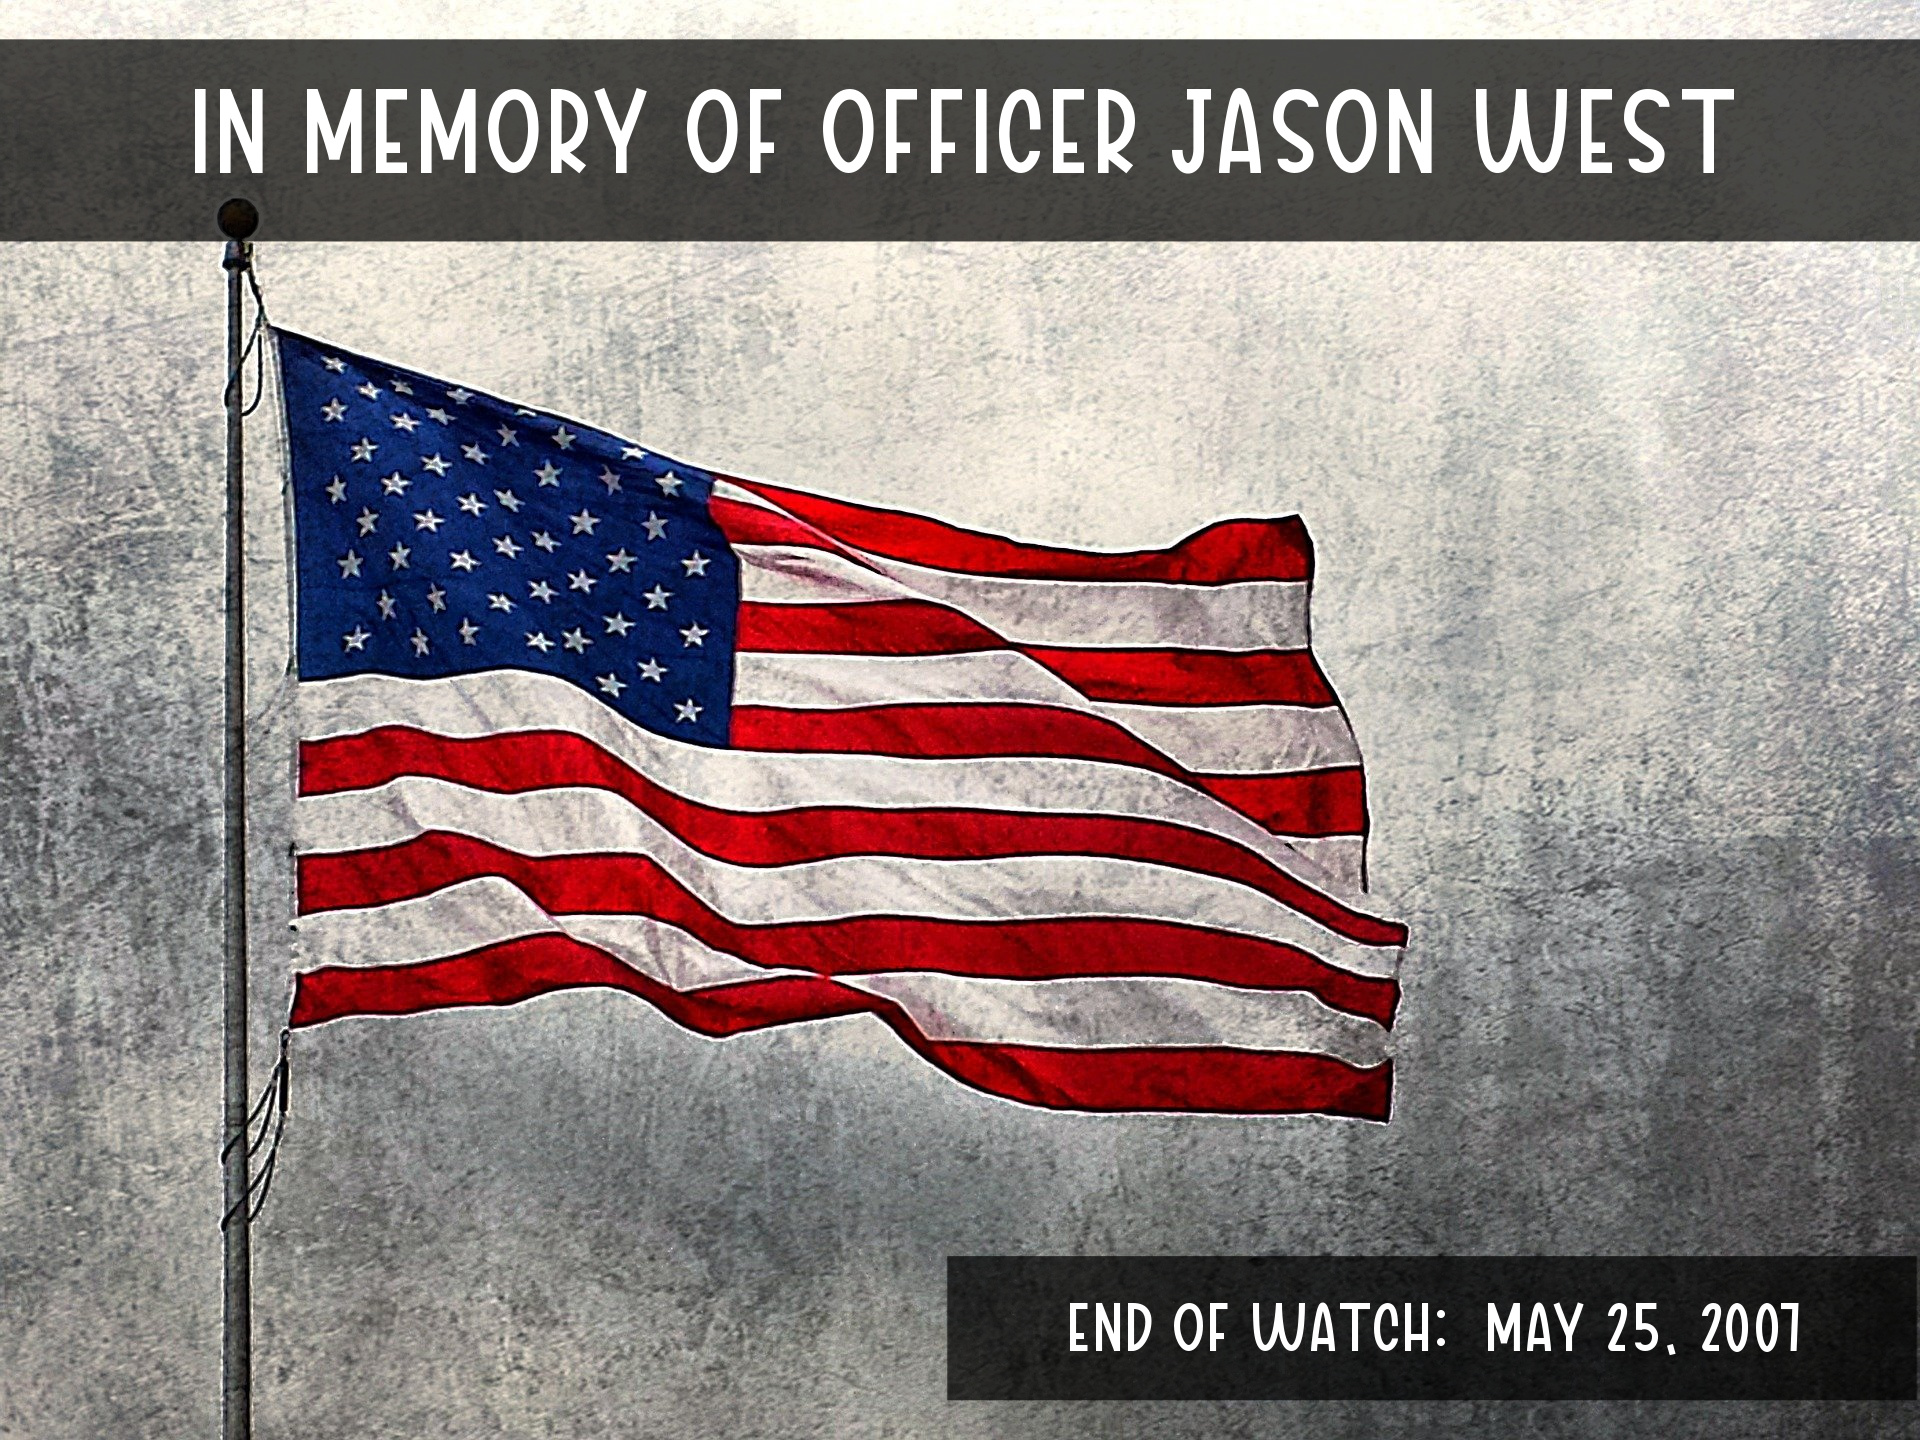 In Memory of Officer Jason West